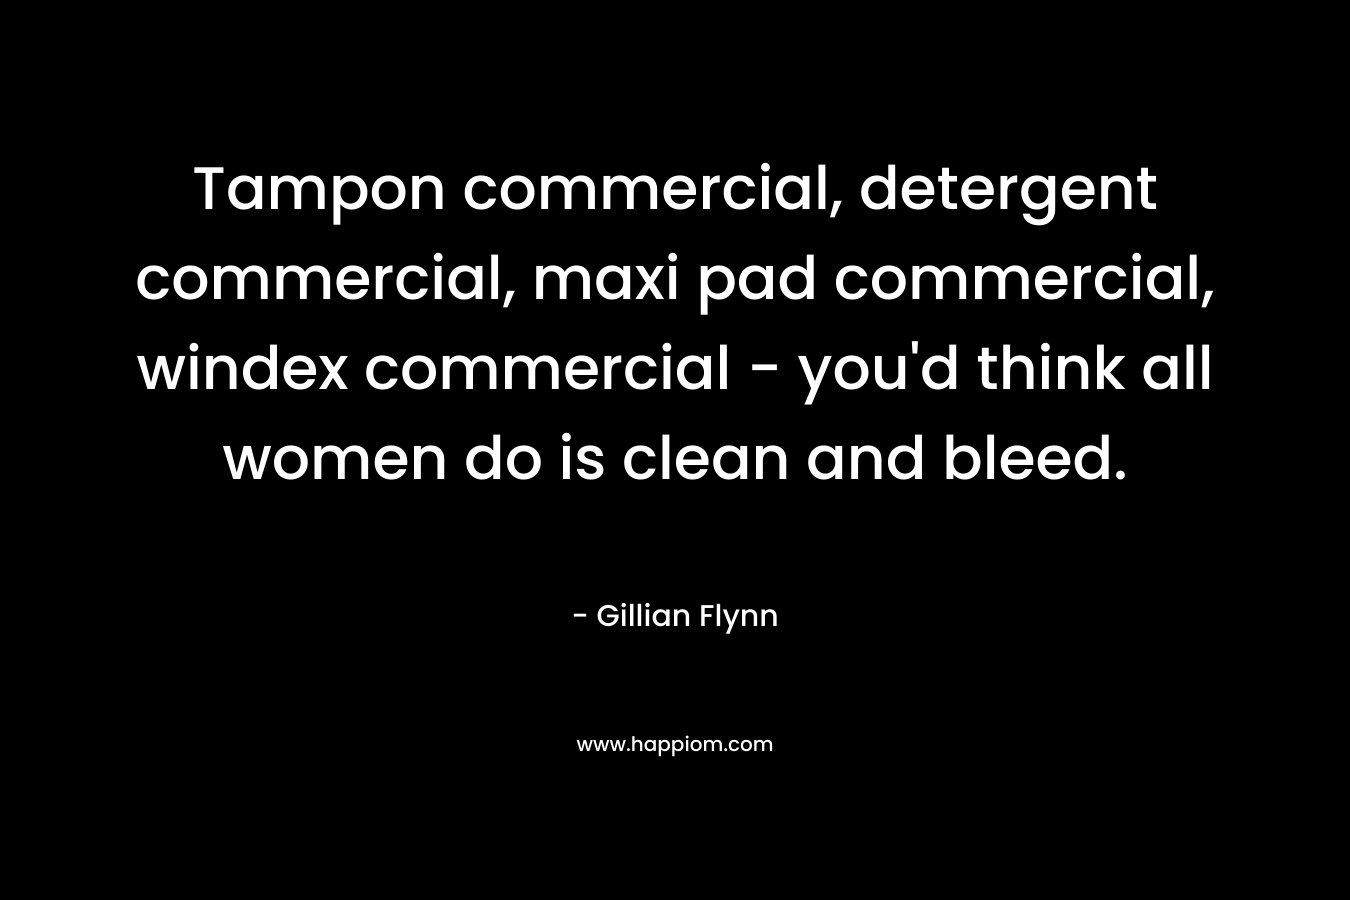 Tampon commercial, detergent commercial, maxi pad commercial, windex commercial - you'd think all women do is clean and bleed.